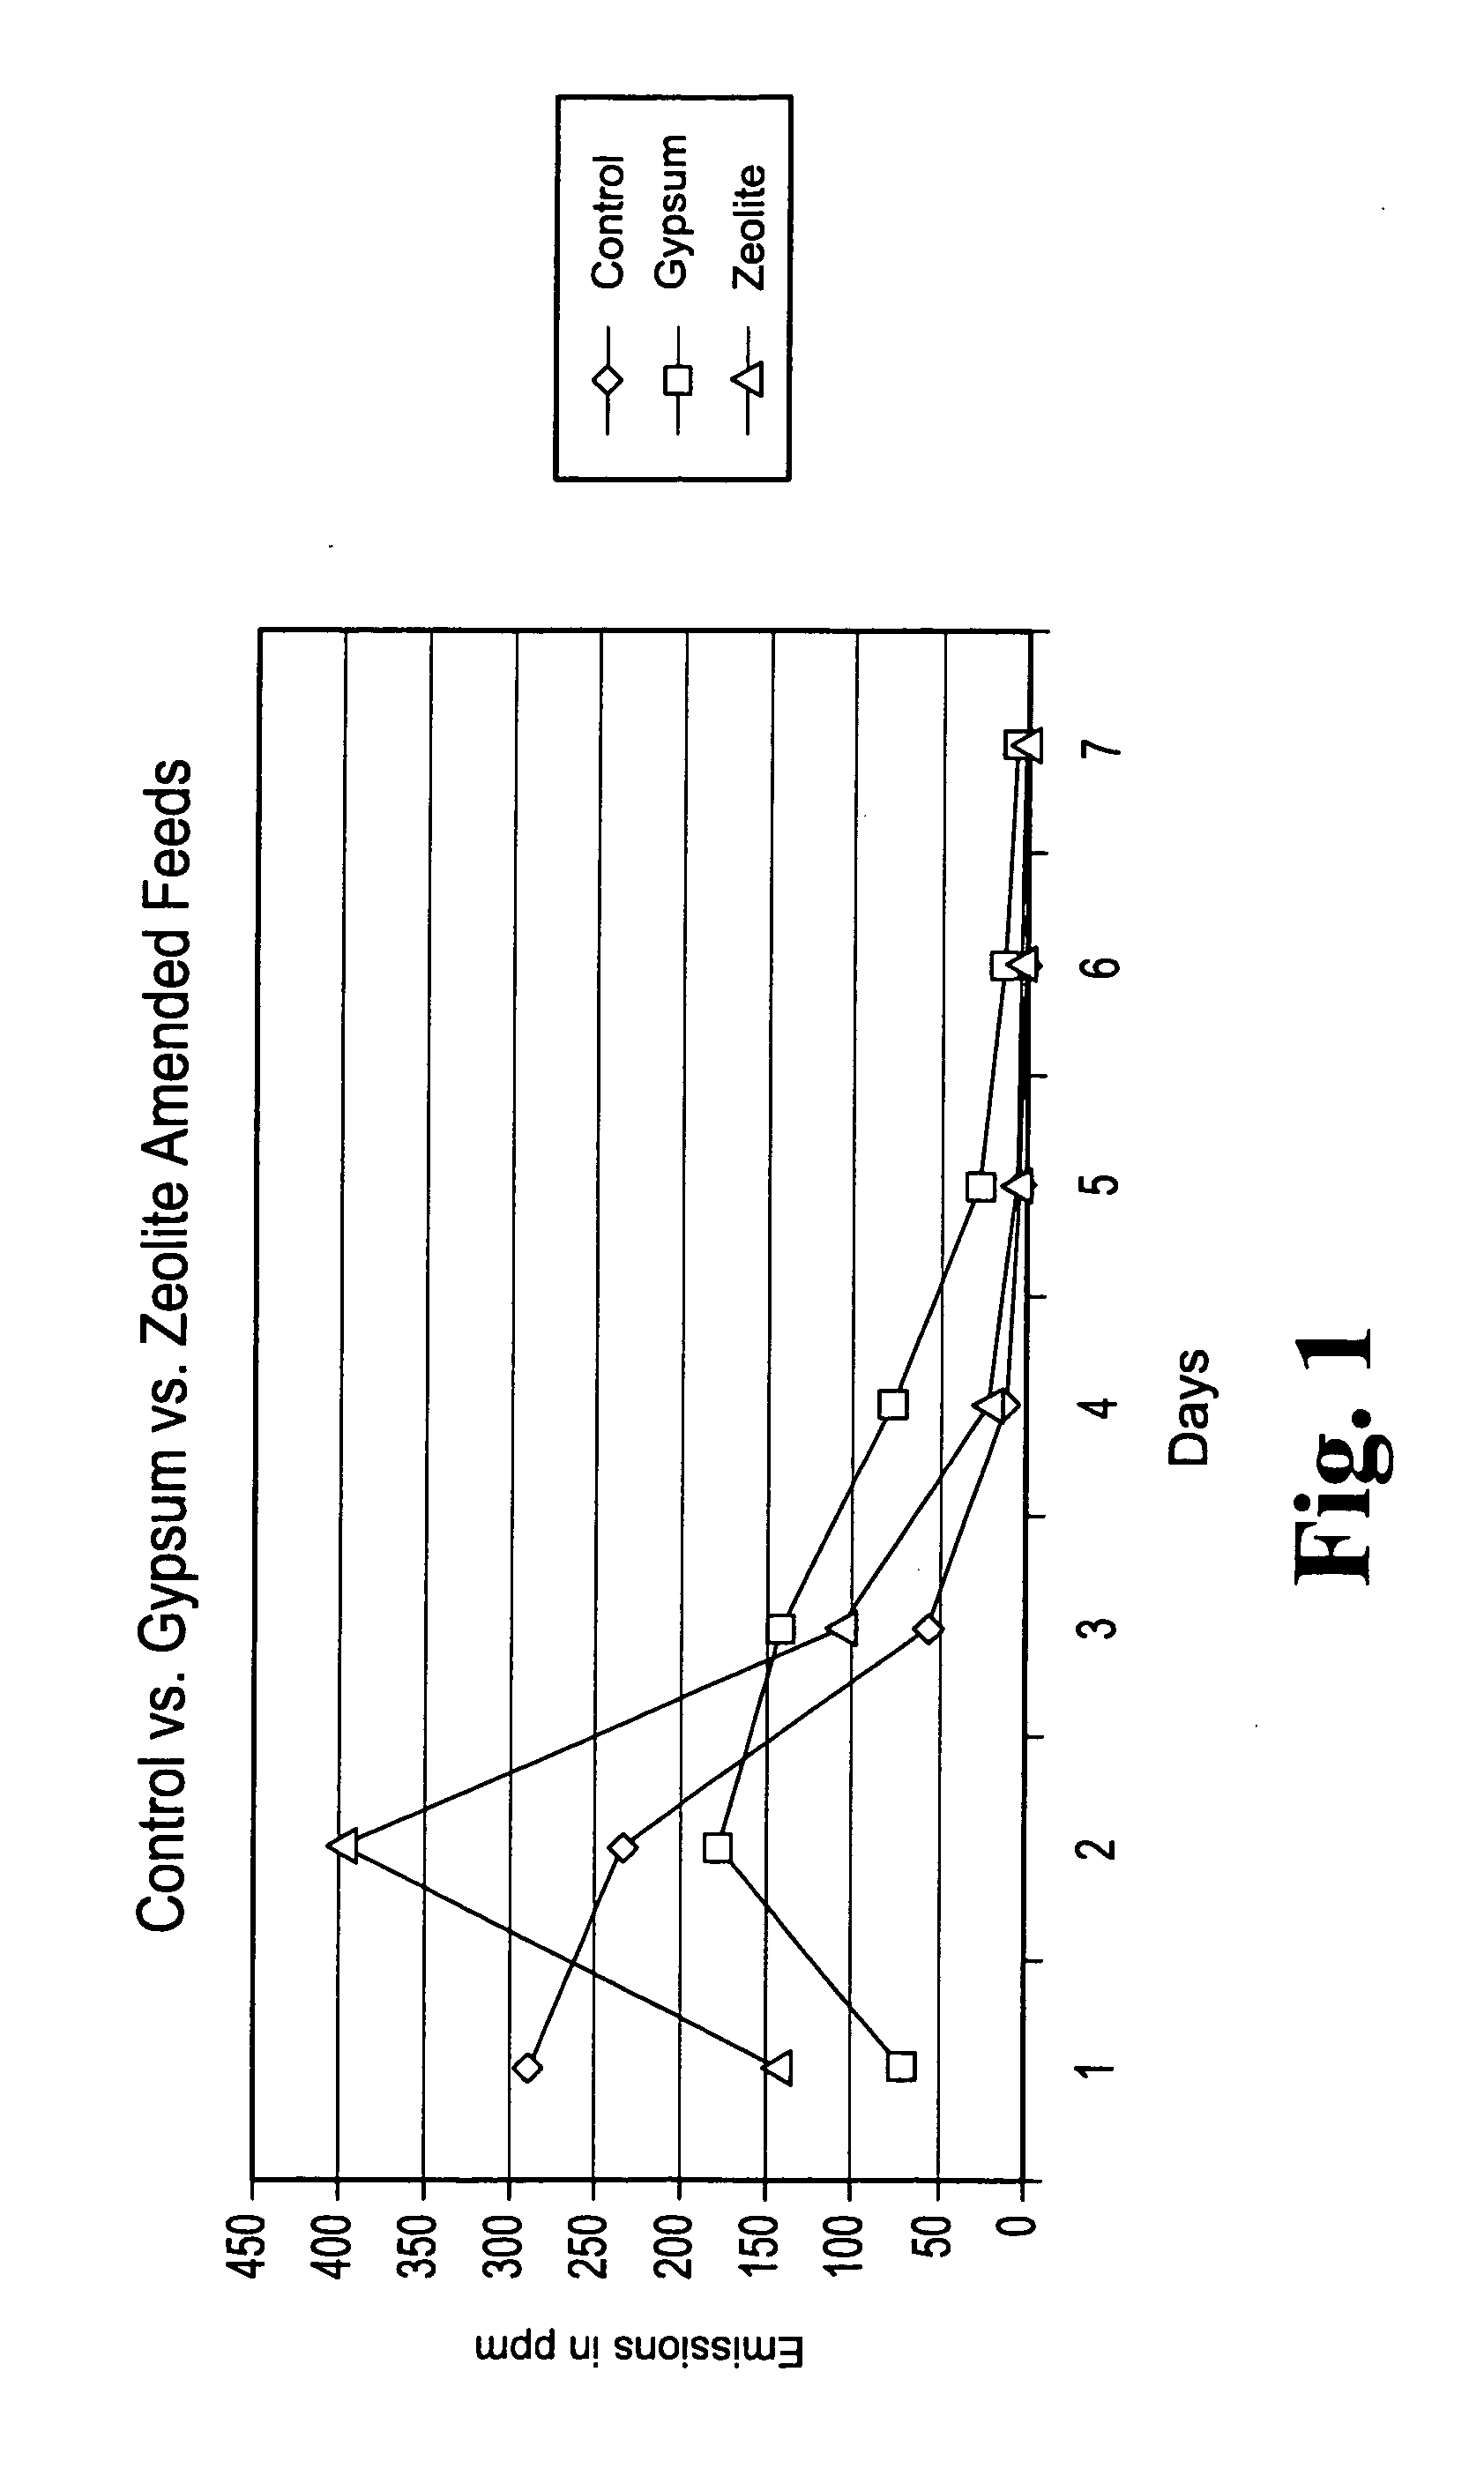 Animal feed and methods for reducing ammonia and phosphorus levels in manure